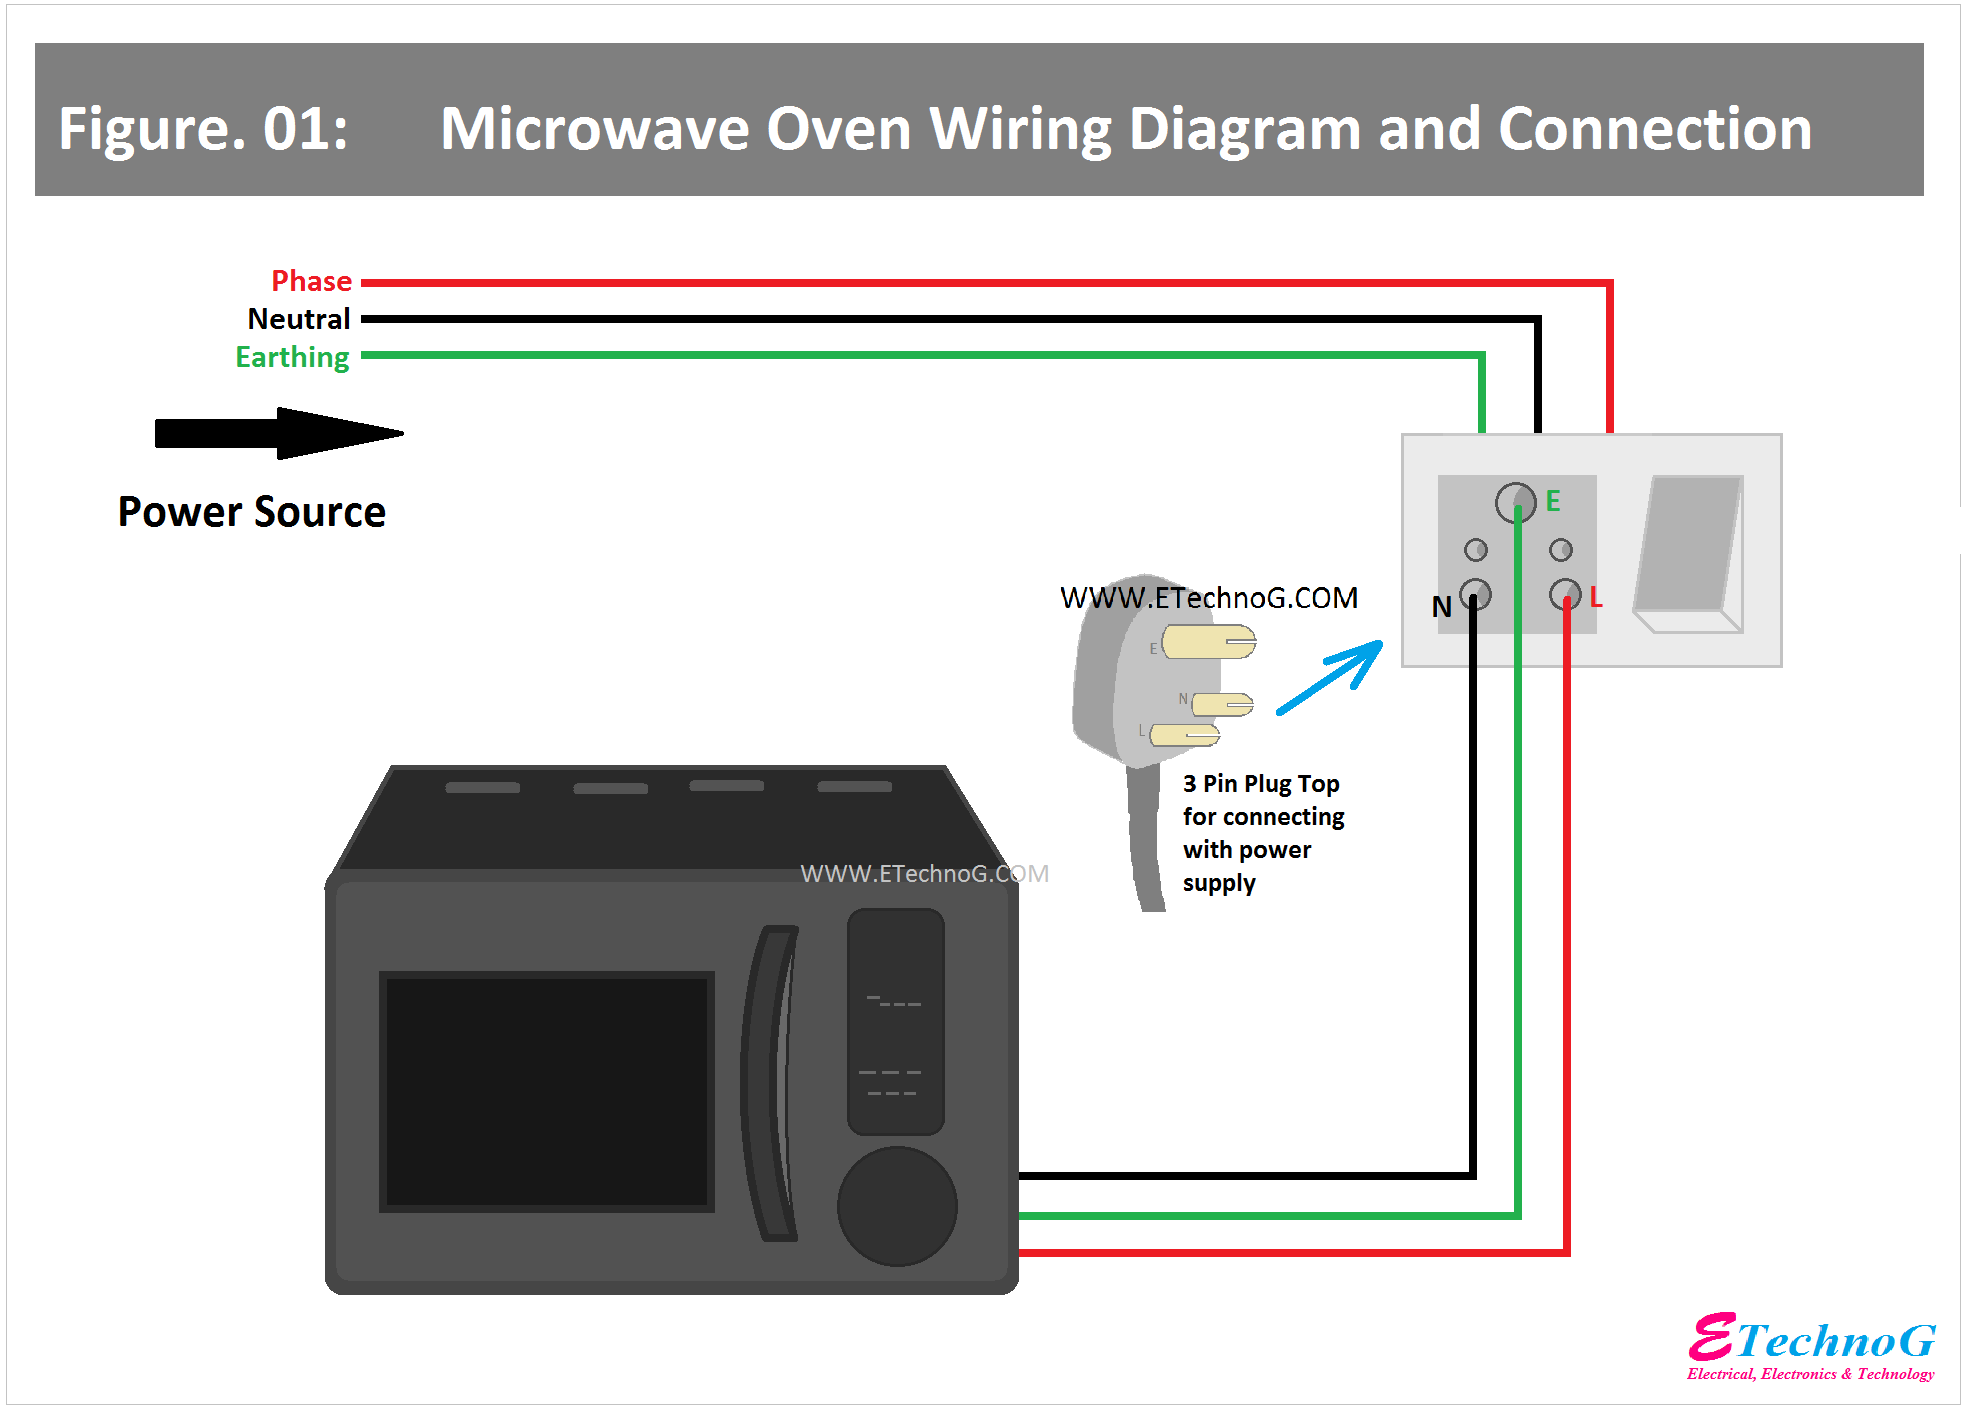 Microwave Oven Wiring Diagram and Connection